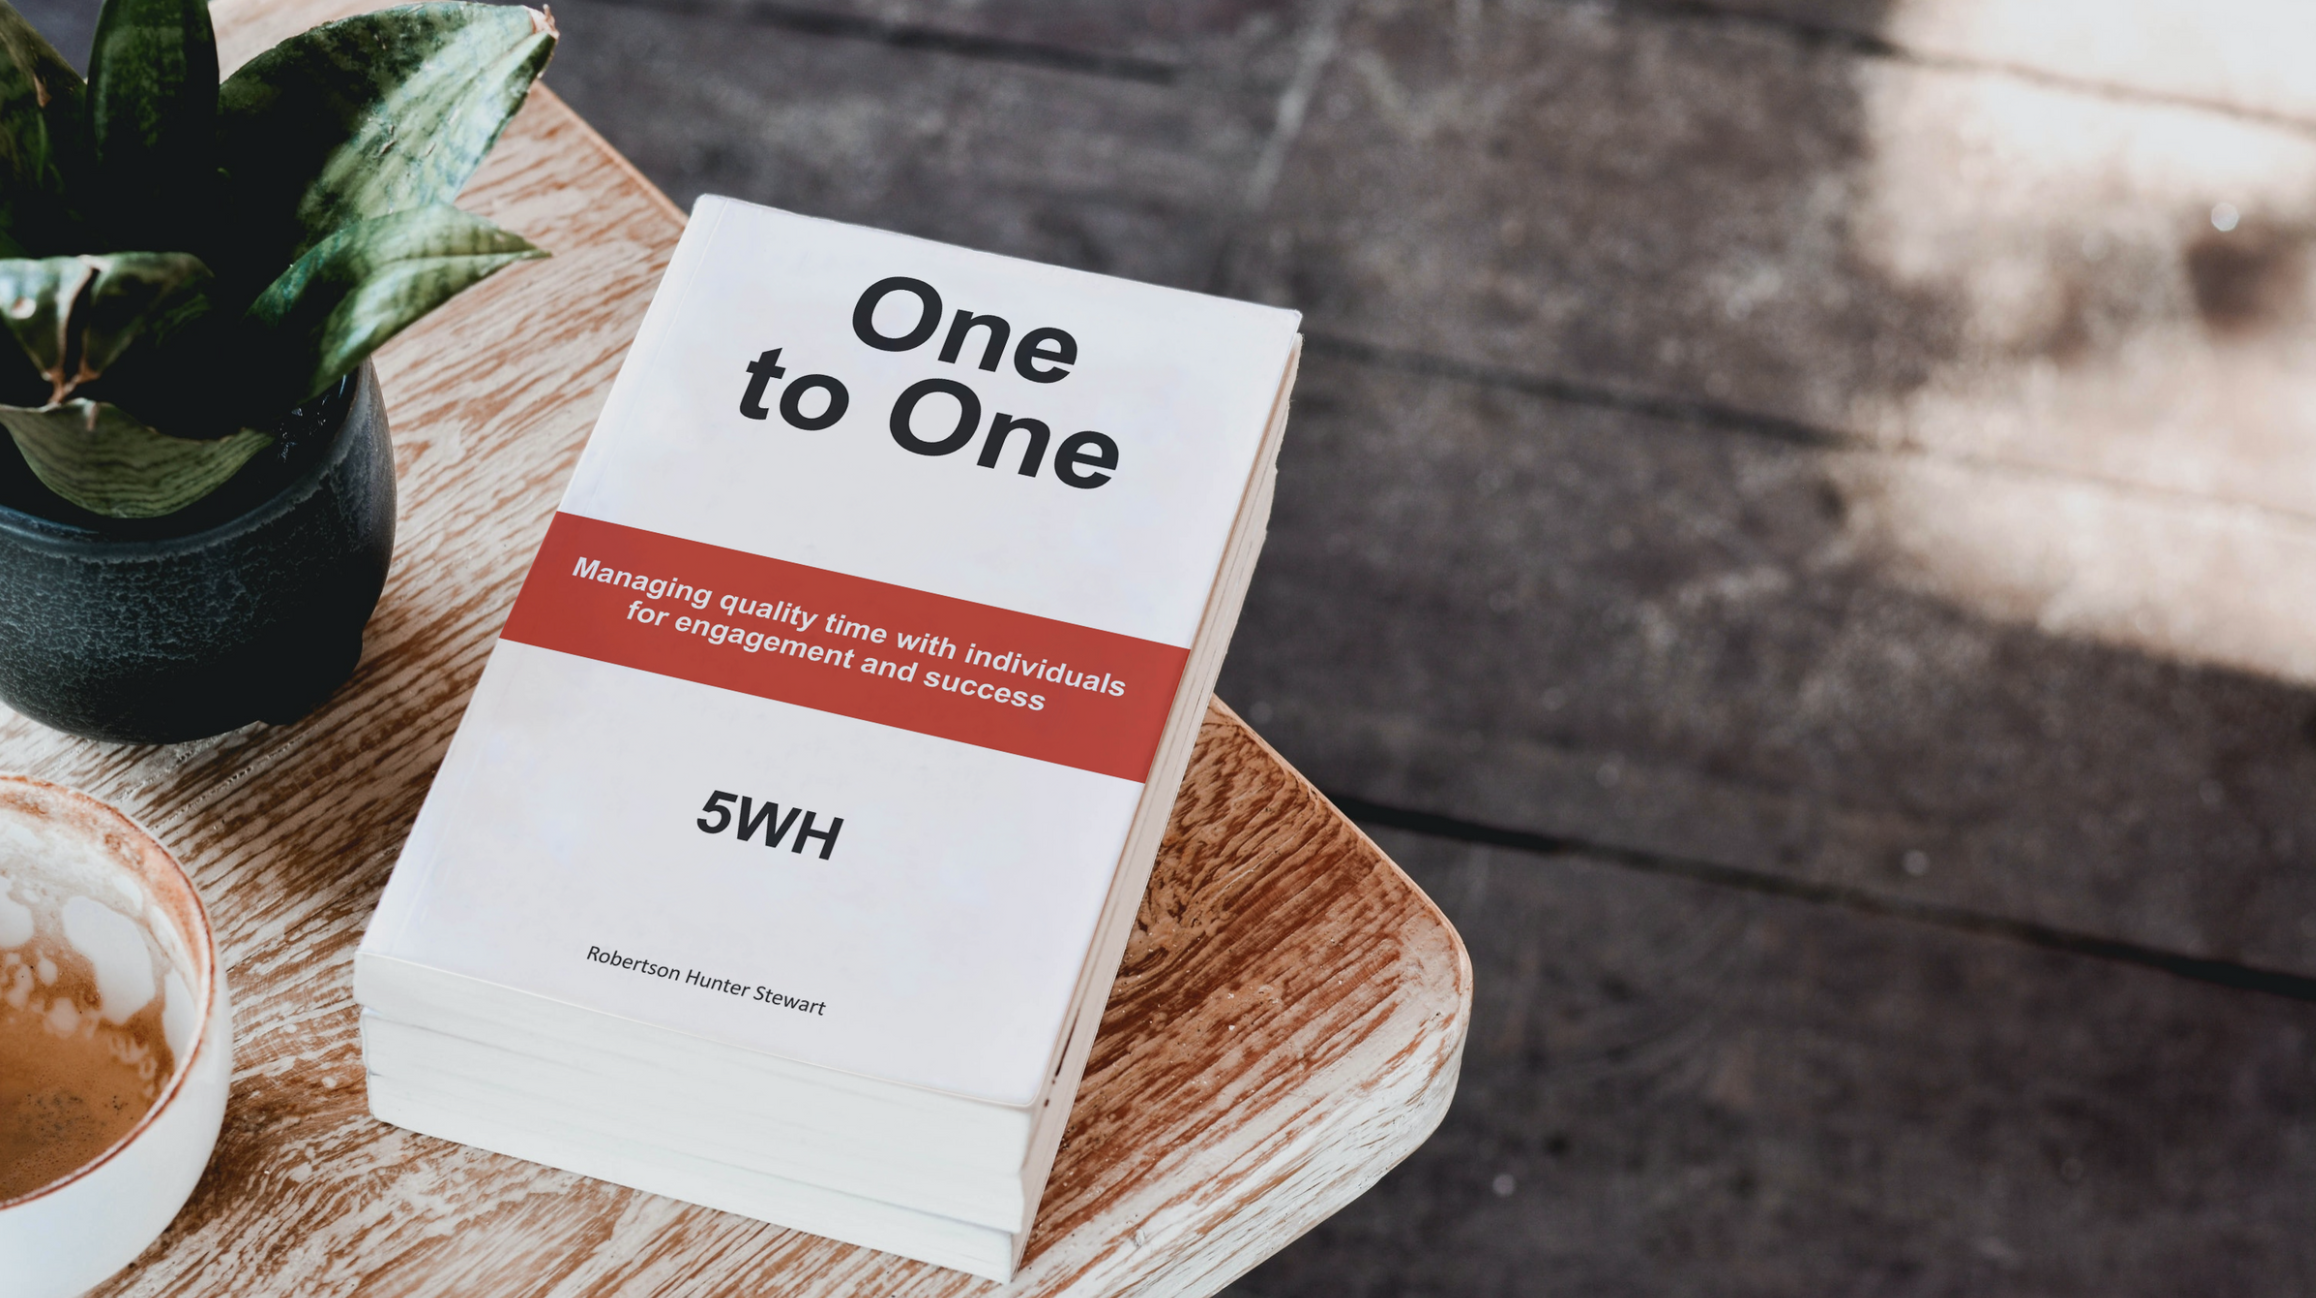 Book one to one Managing quality time with individuals for engagement and success